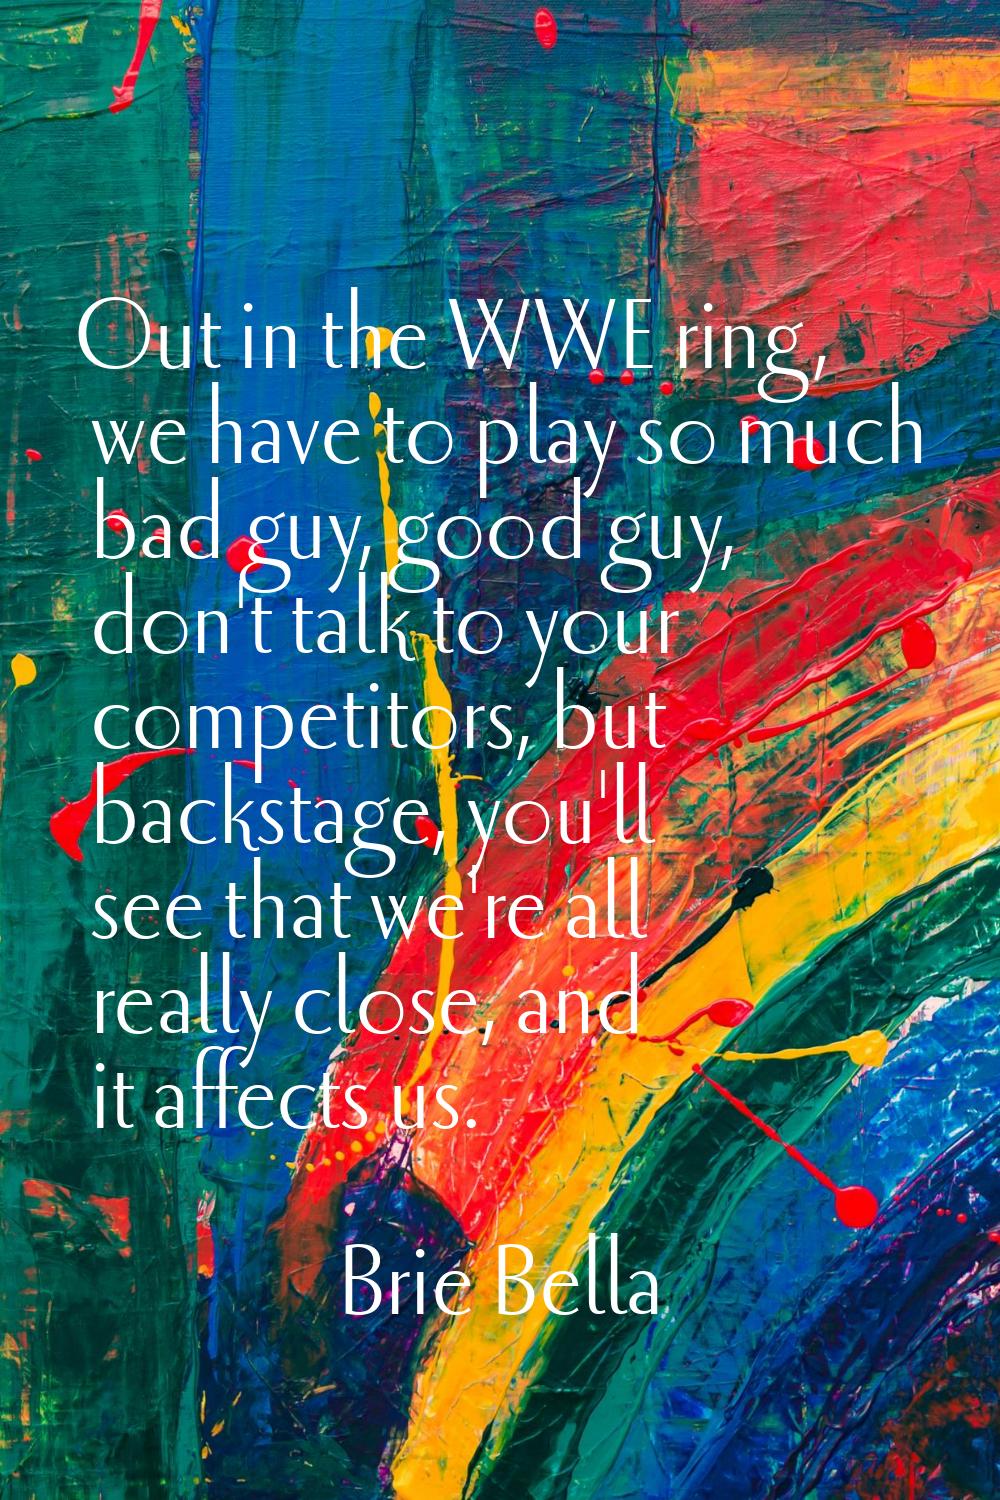 Out in the WWE ring, we have to play so much bad guy, good guy, don't talk to your competitors, but